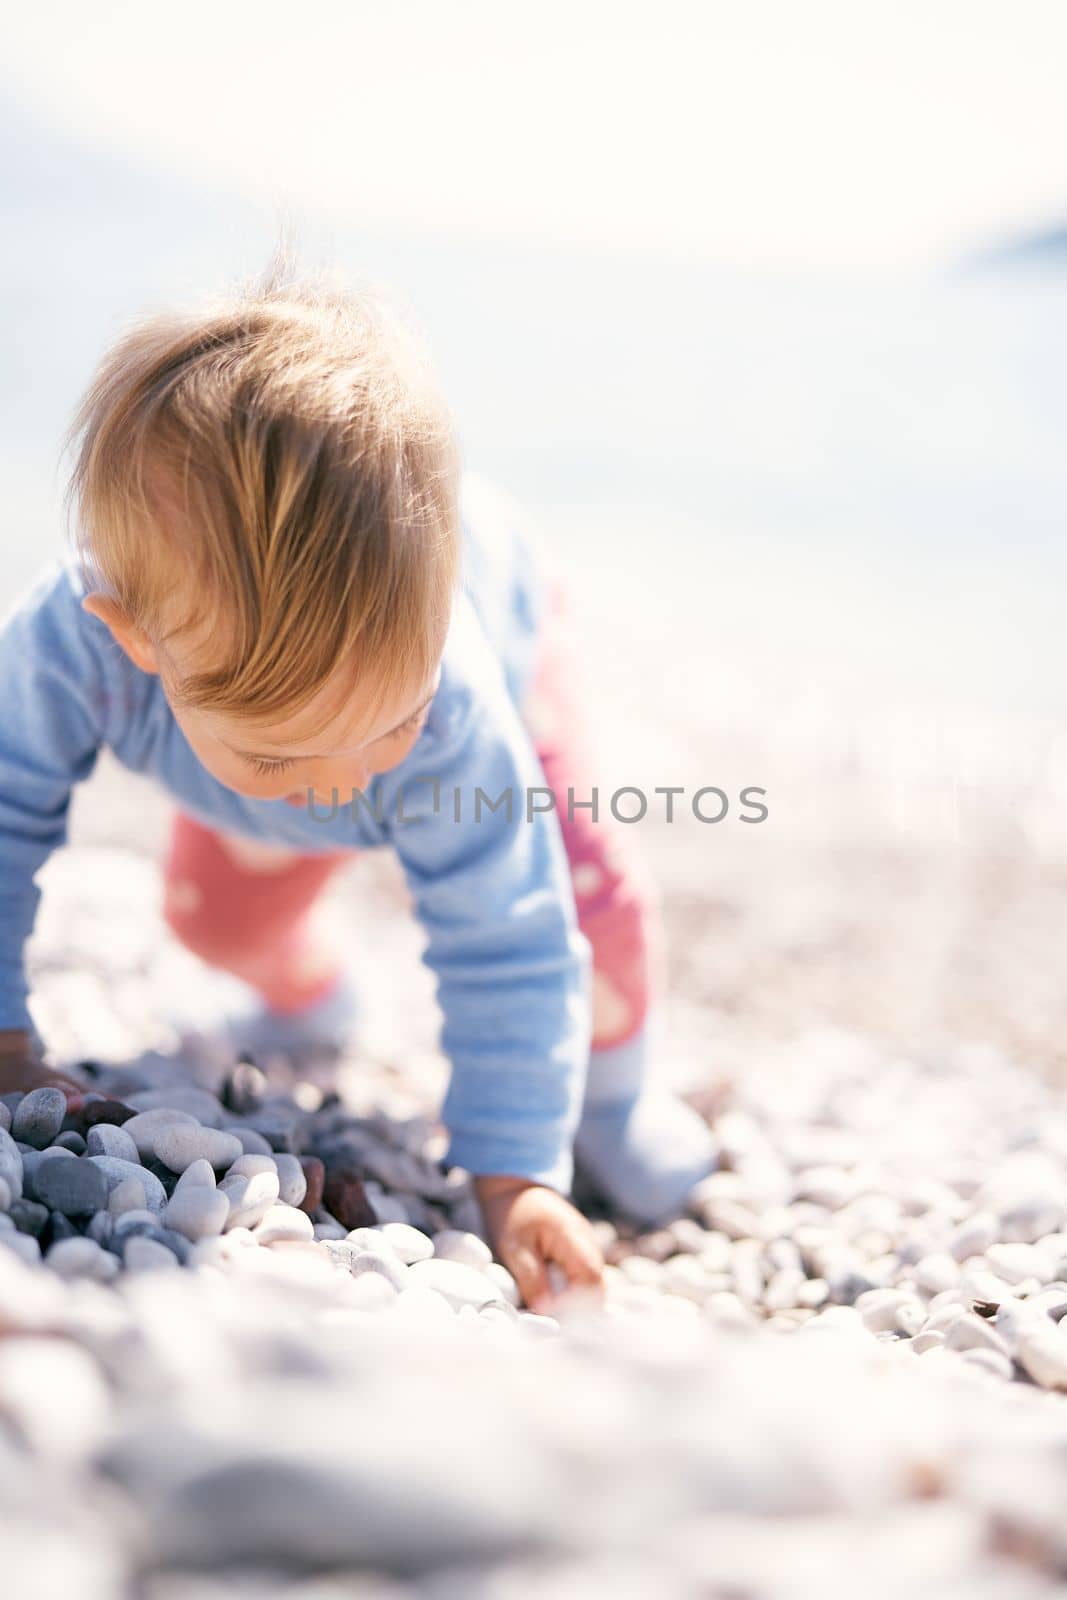 Cute baby is on all fours on a pebble beach with his head down. Close-up by Nadtochiy